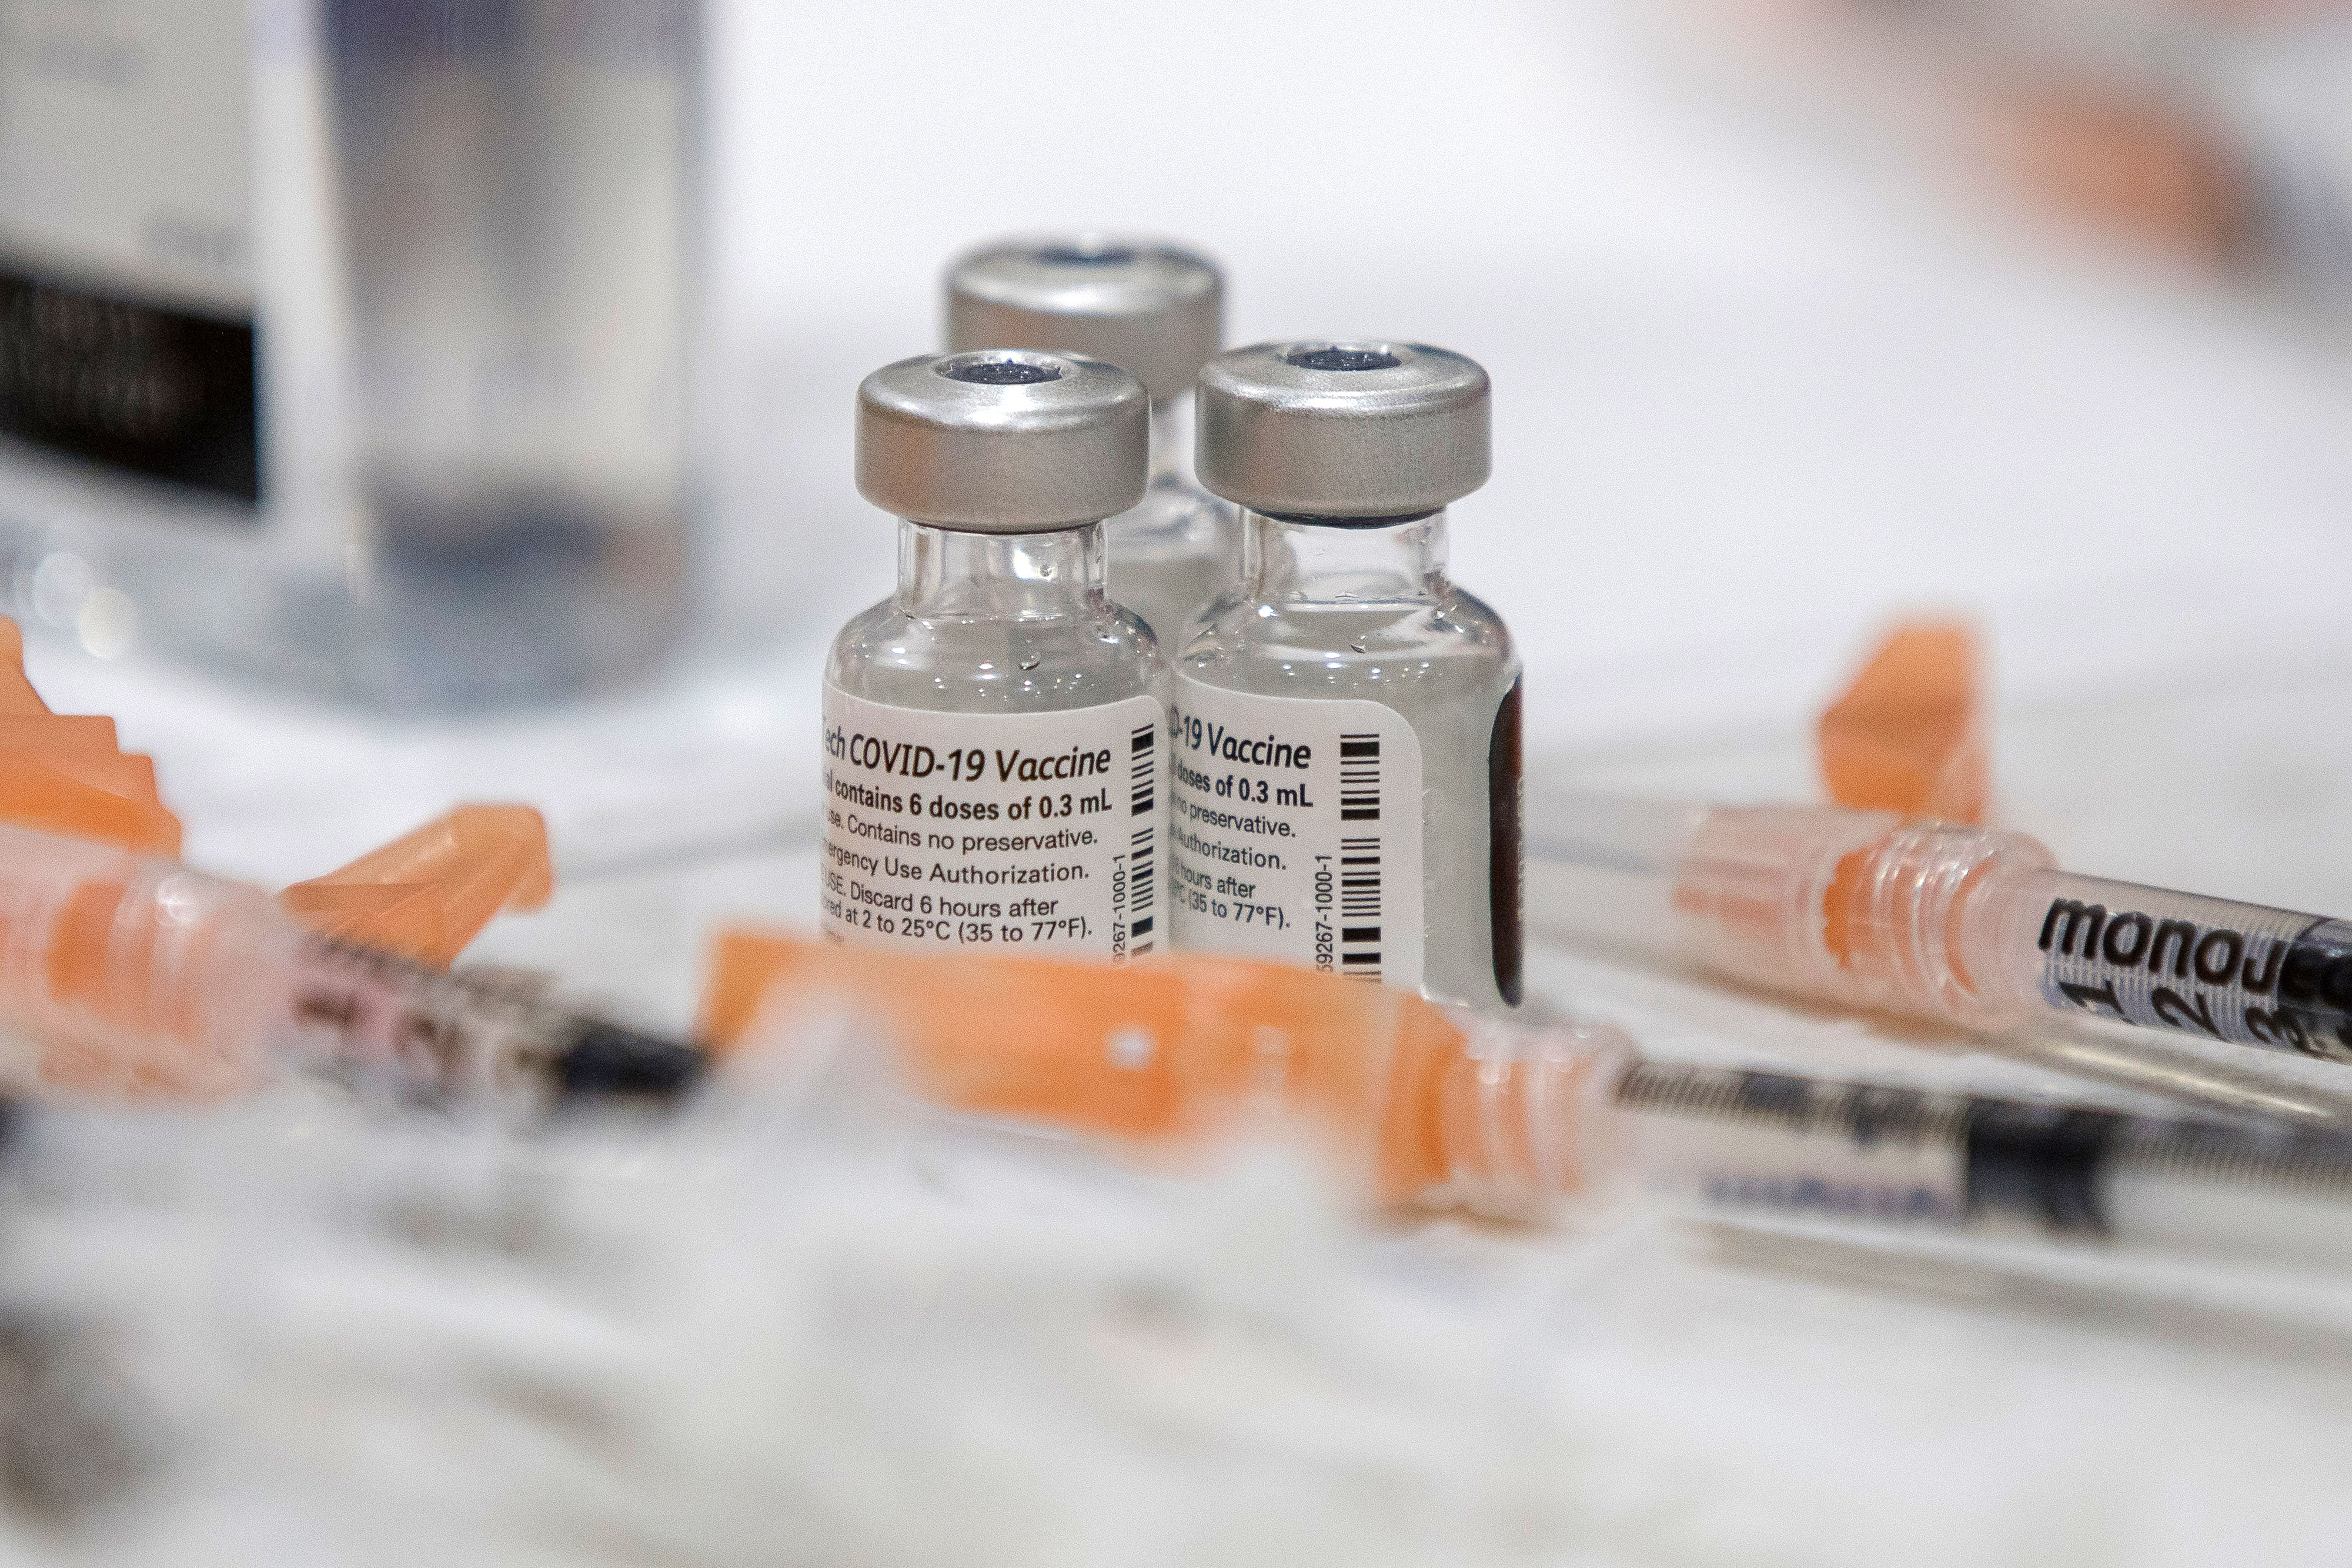 Vials of the Pfizer/BioNTech Covid-19 vaccine are in Manning, South Carolina, on March 12.